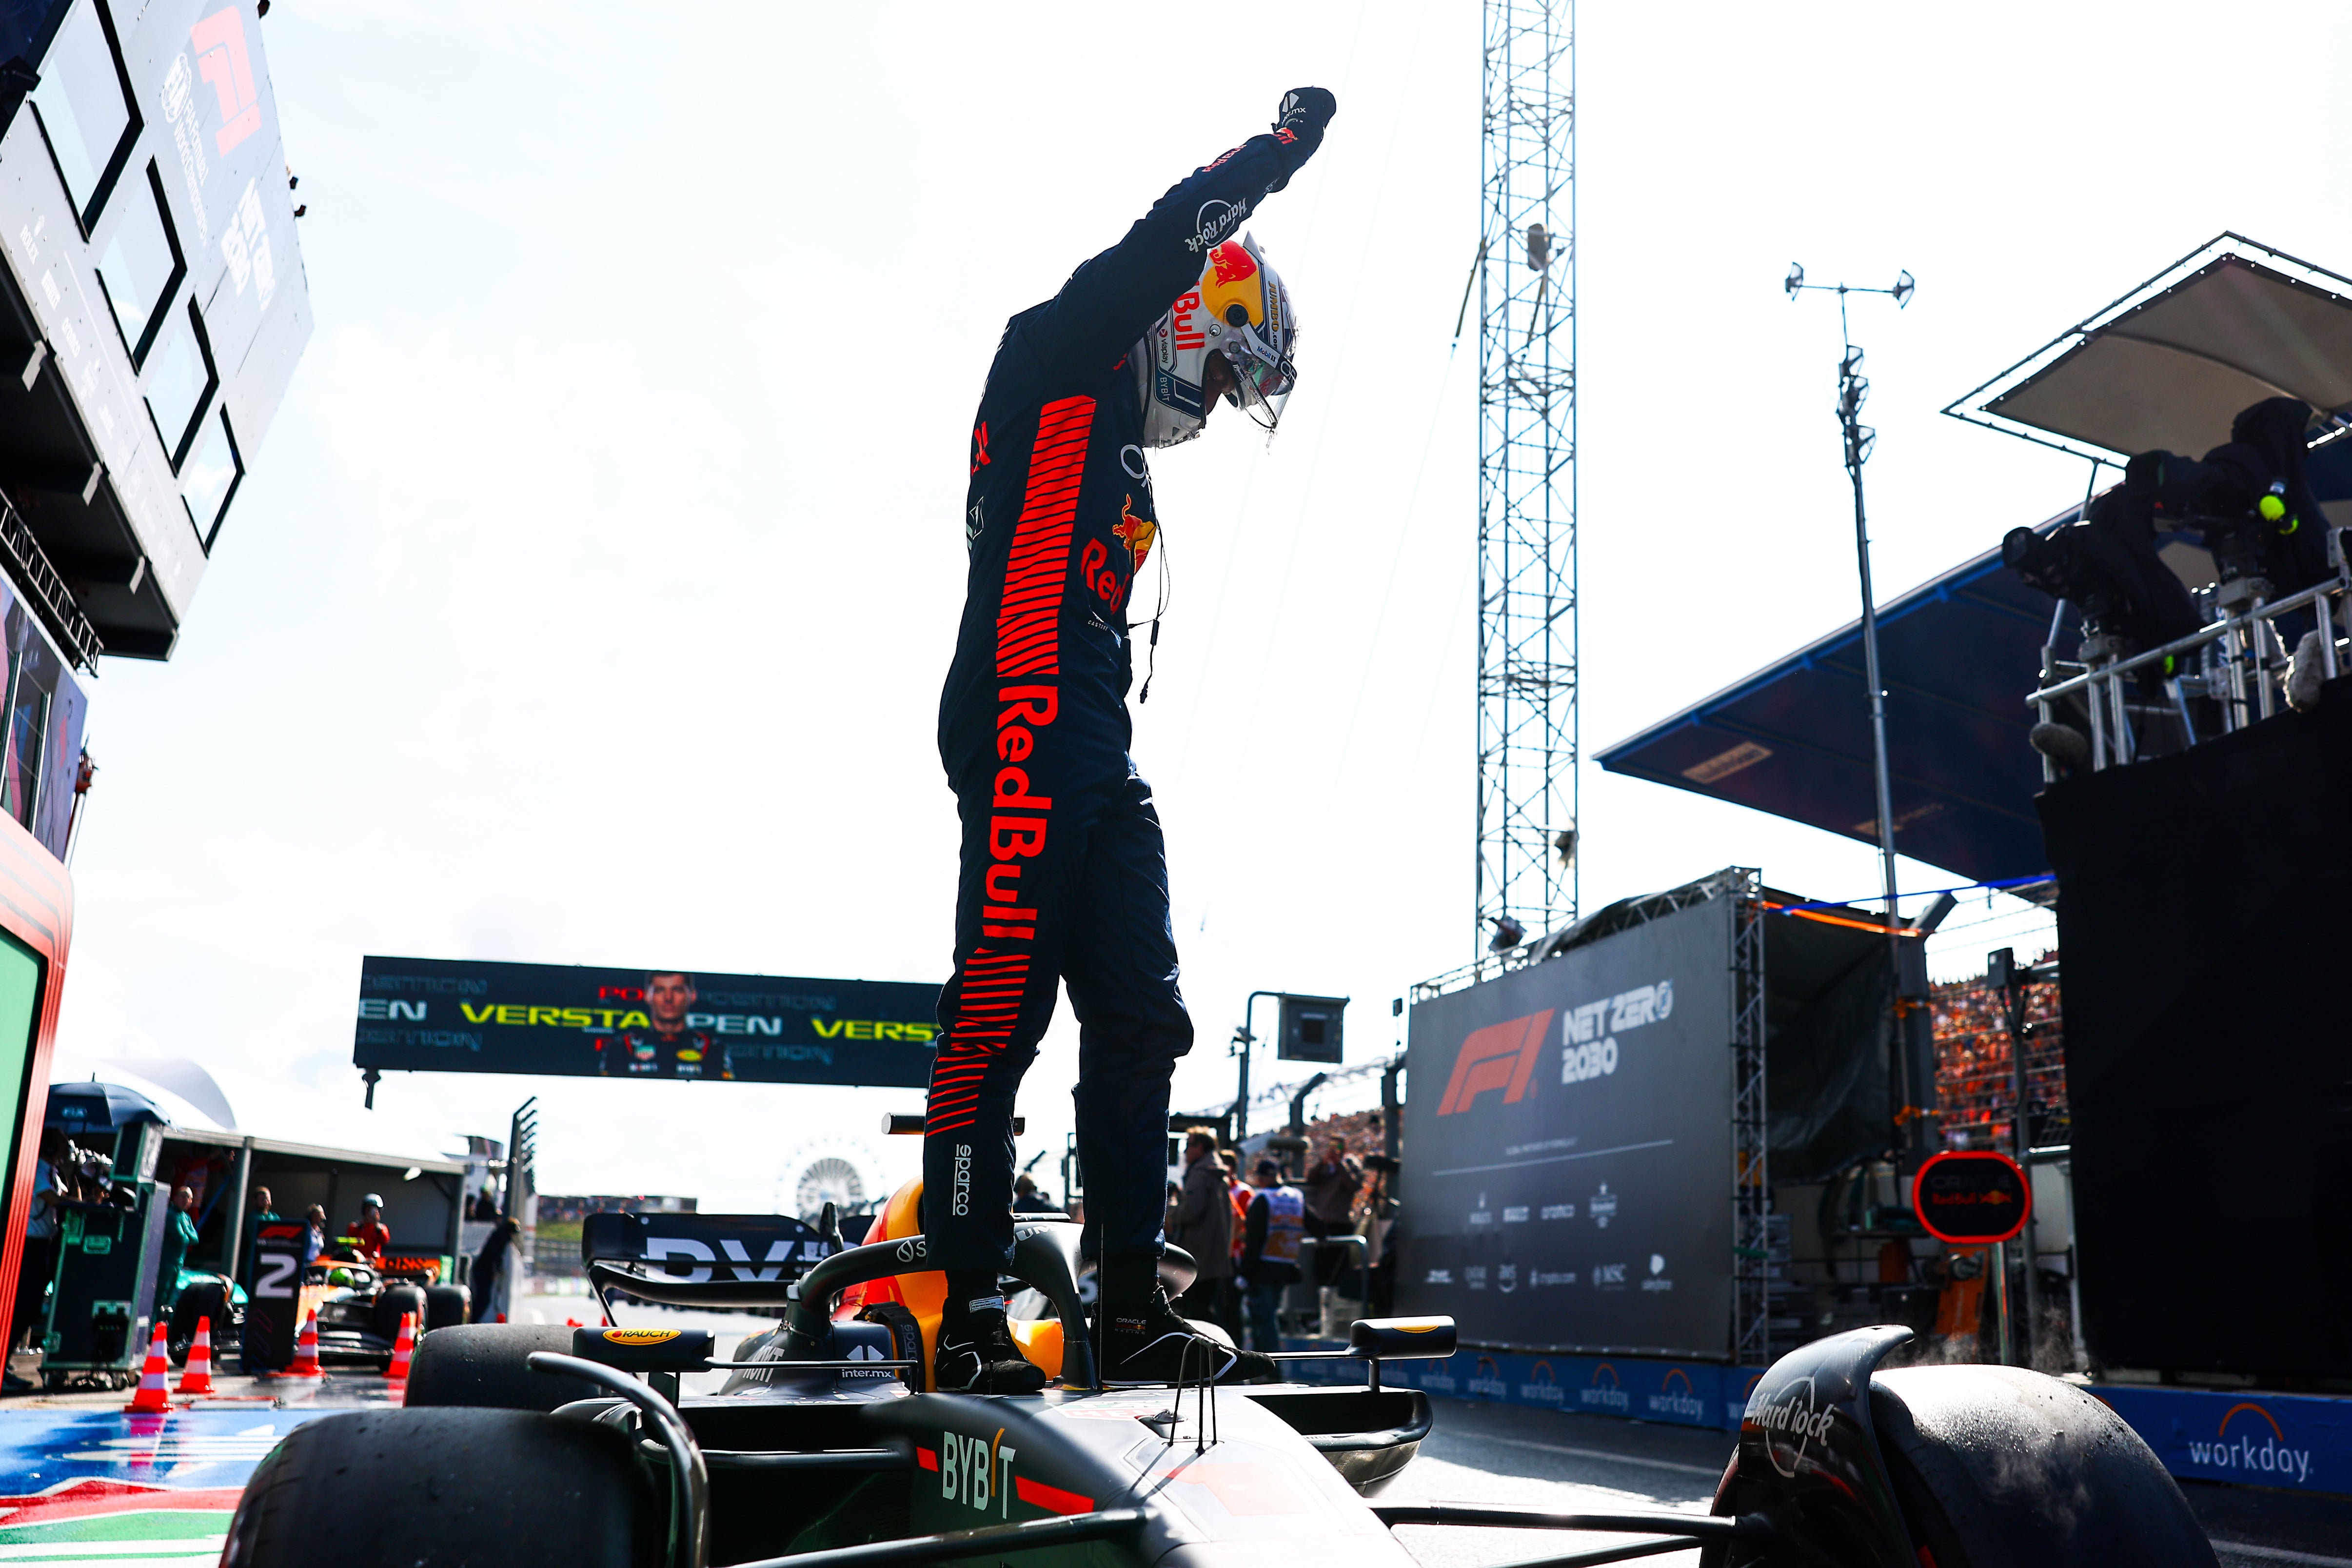 Max Verstappen claimed pole position for the Dutch Grand Prix